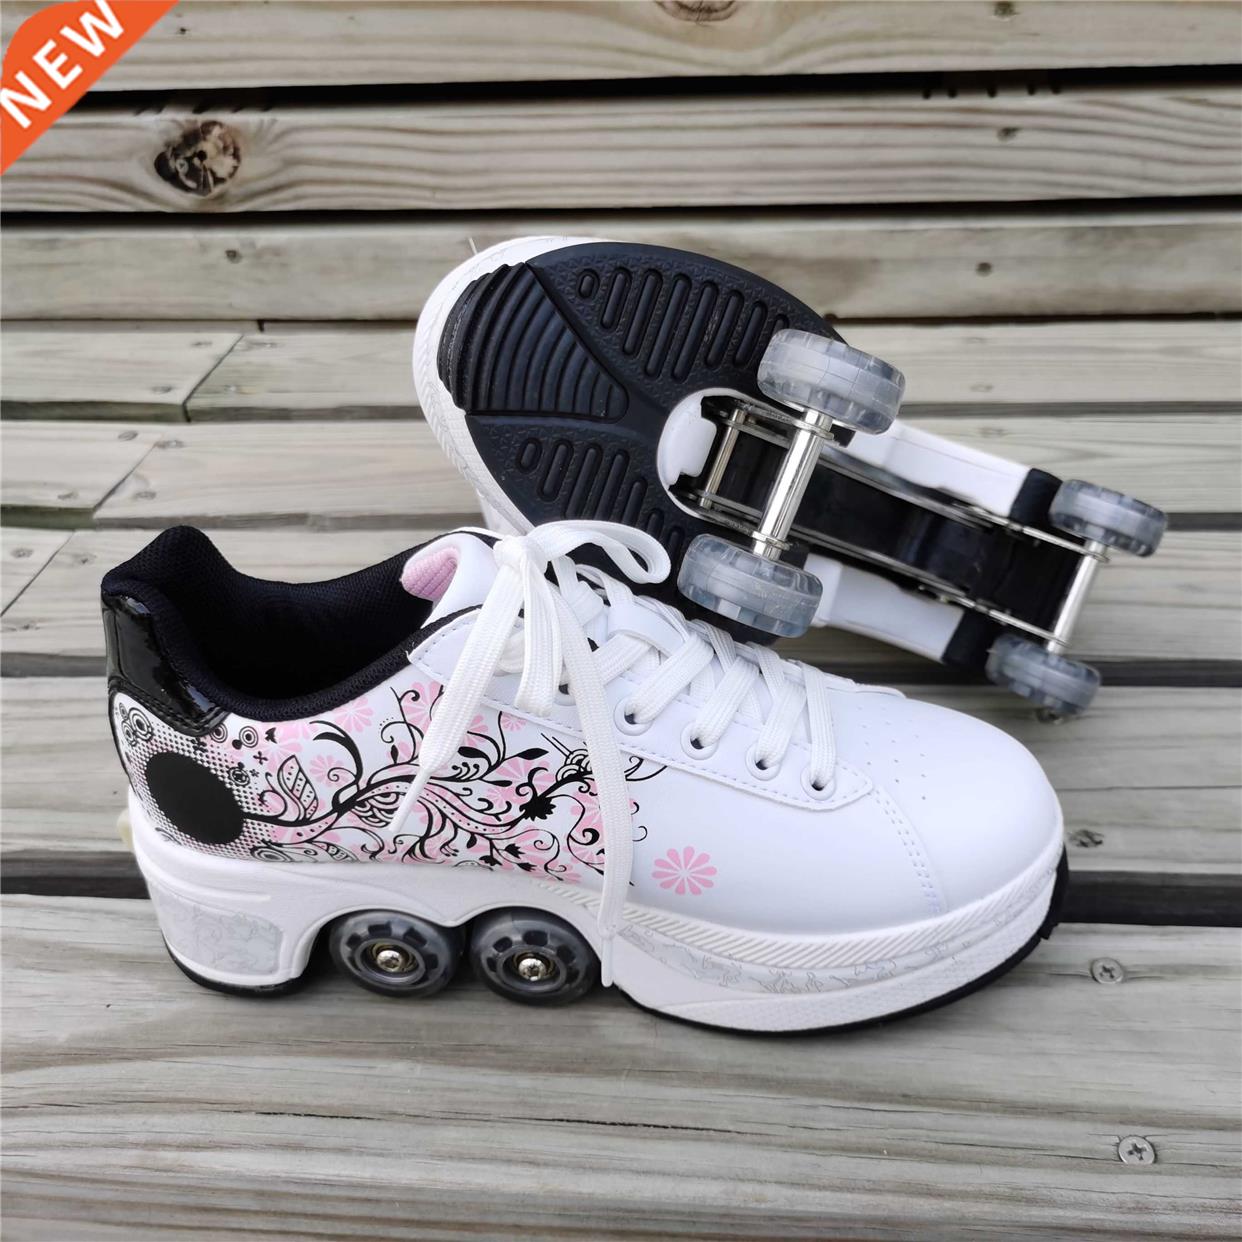 Roller Skates Women Shoes With Wheels Roller Sneakers For Gi